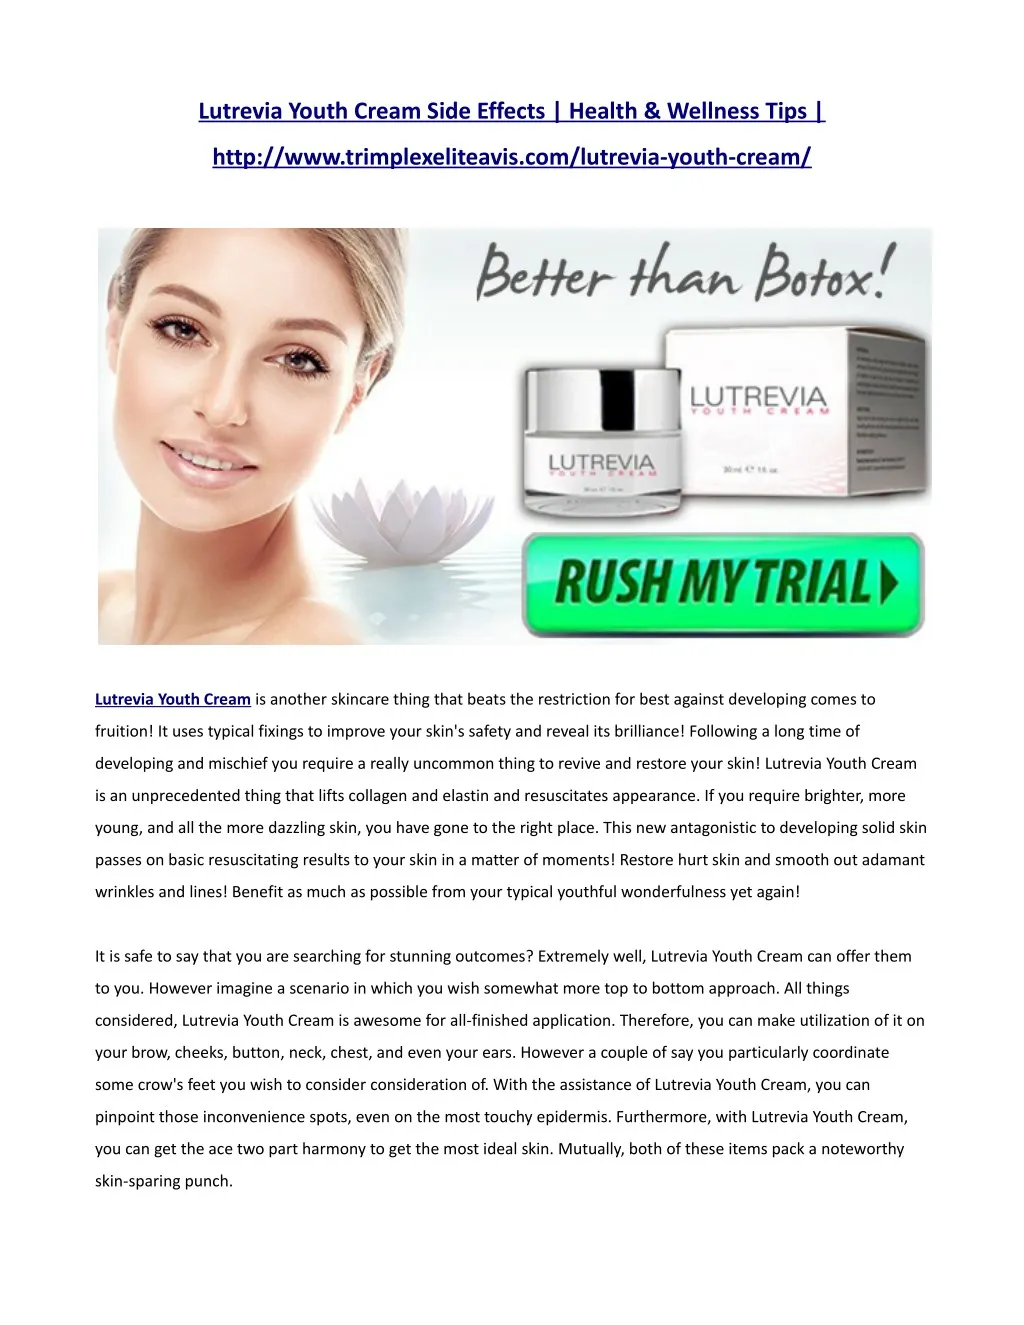 lutrevia youth cream side effects health wellness